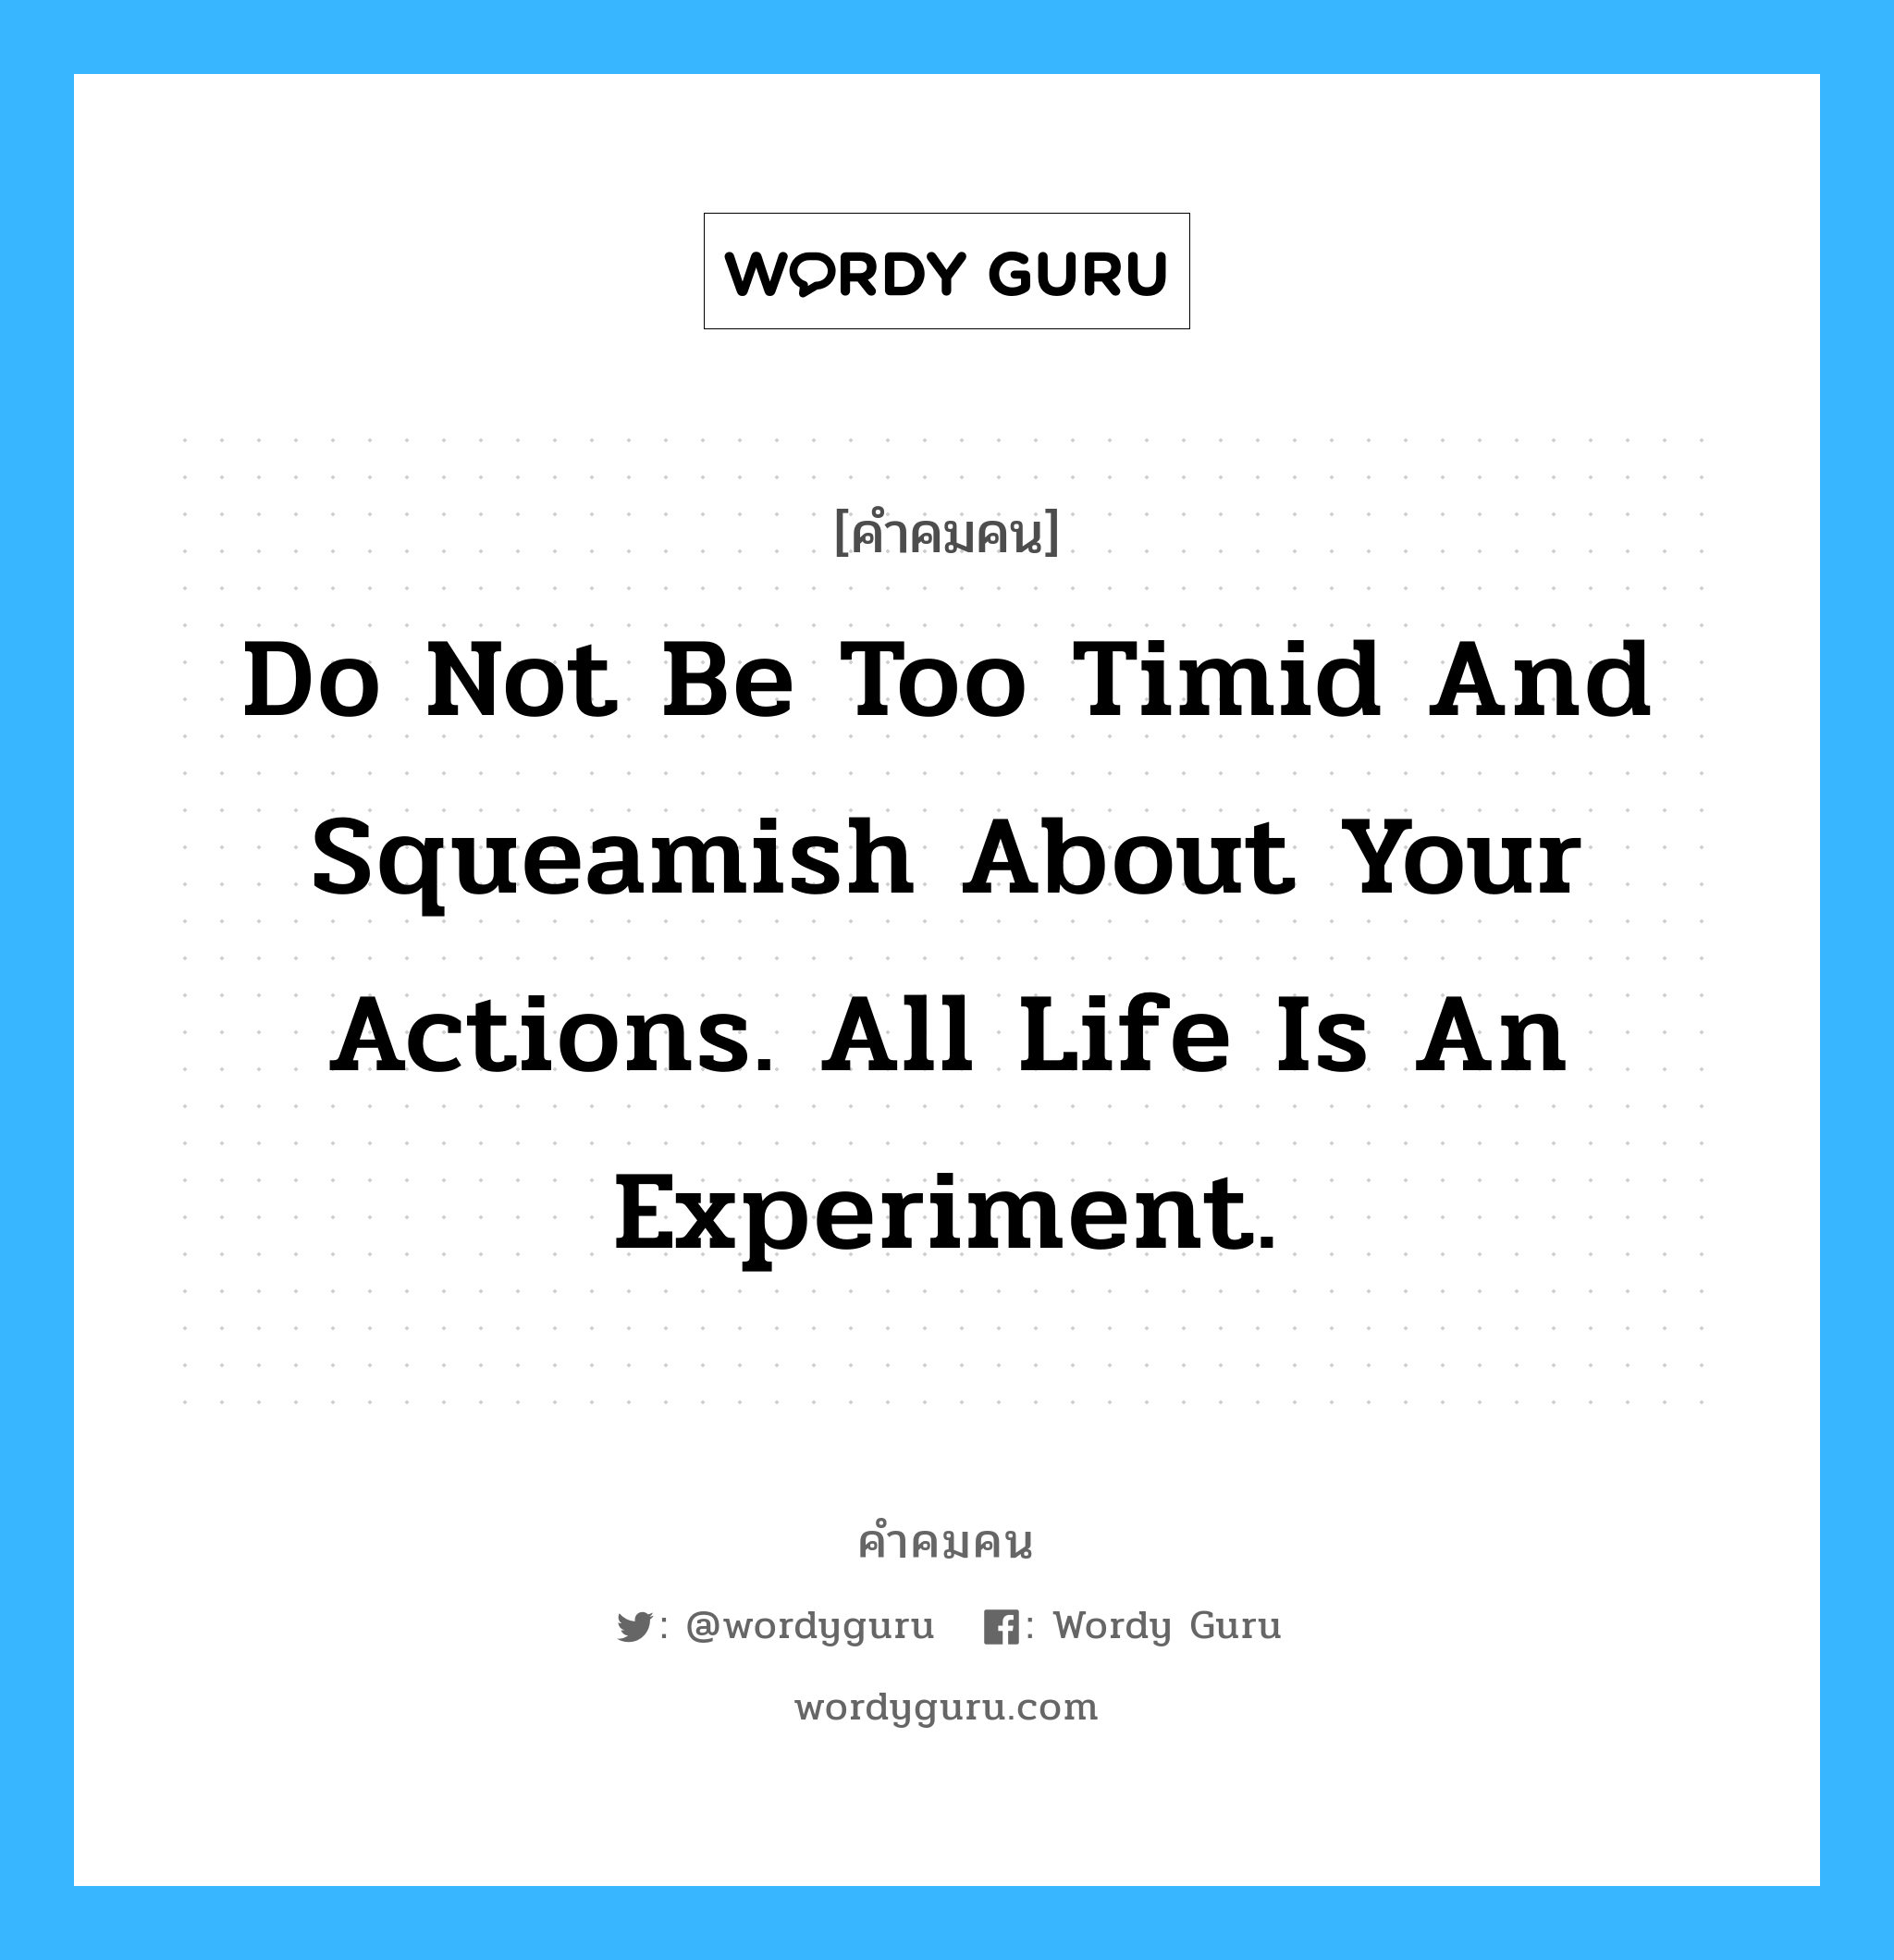 Do not be too timid and squeamish about your actions. All life is an experiment., คำคมคน Do not be too timid and squeamish about your actions. All life is an experiment. อย่าขาดความมั่นใจในตัวเอง และตระหนกตกใจในสิ่งที่คุณทำ ทุกๆสิ่งคือประสบการณ์ Ralph waldo Emerson หมวด Ralph waldo Emerson